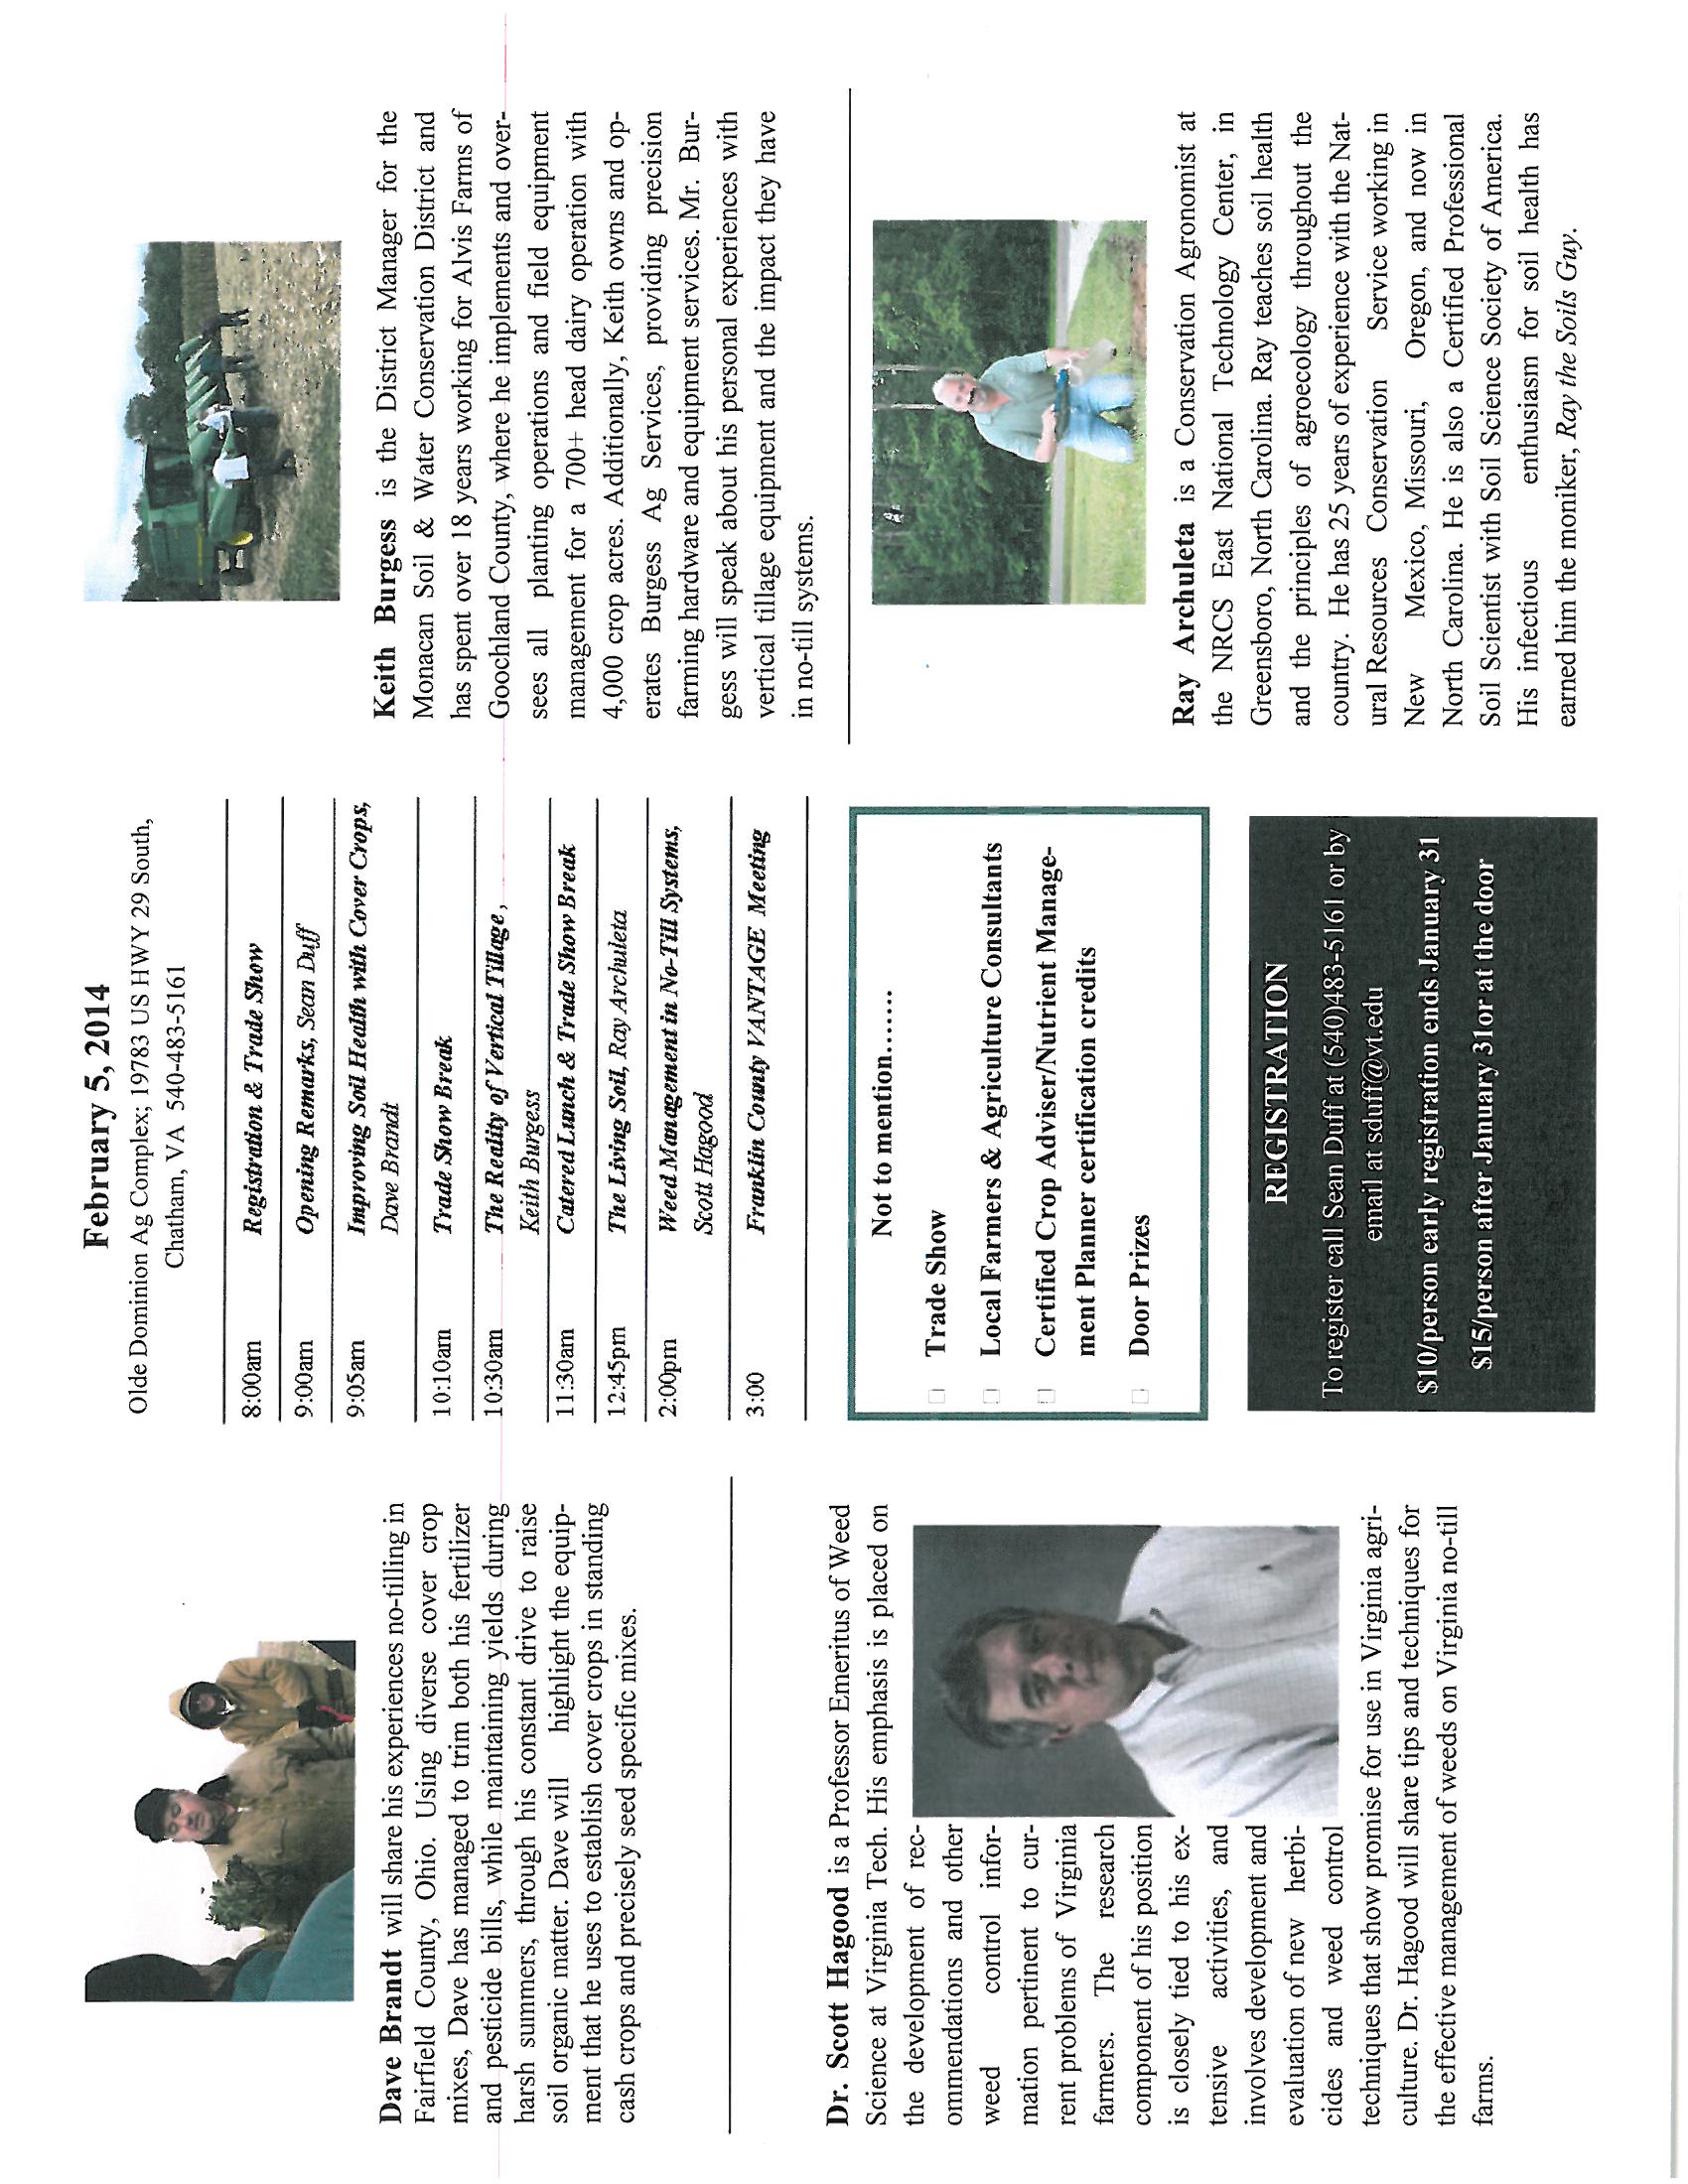 Brochure Page 2 of 2